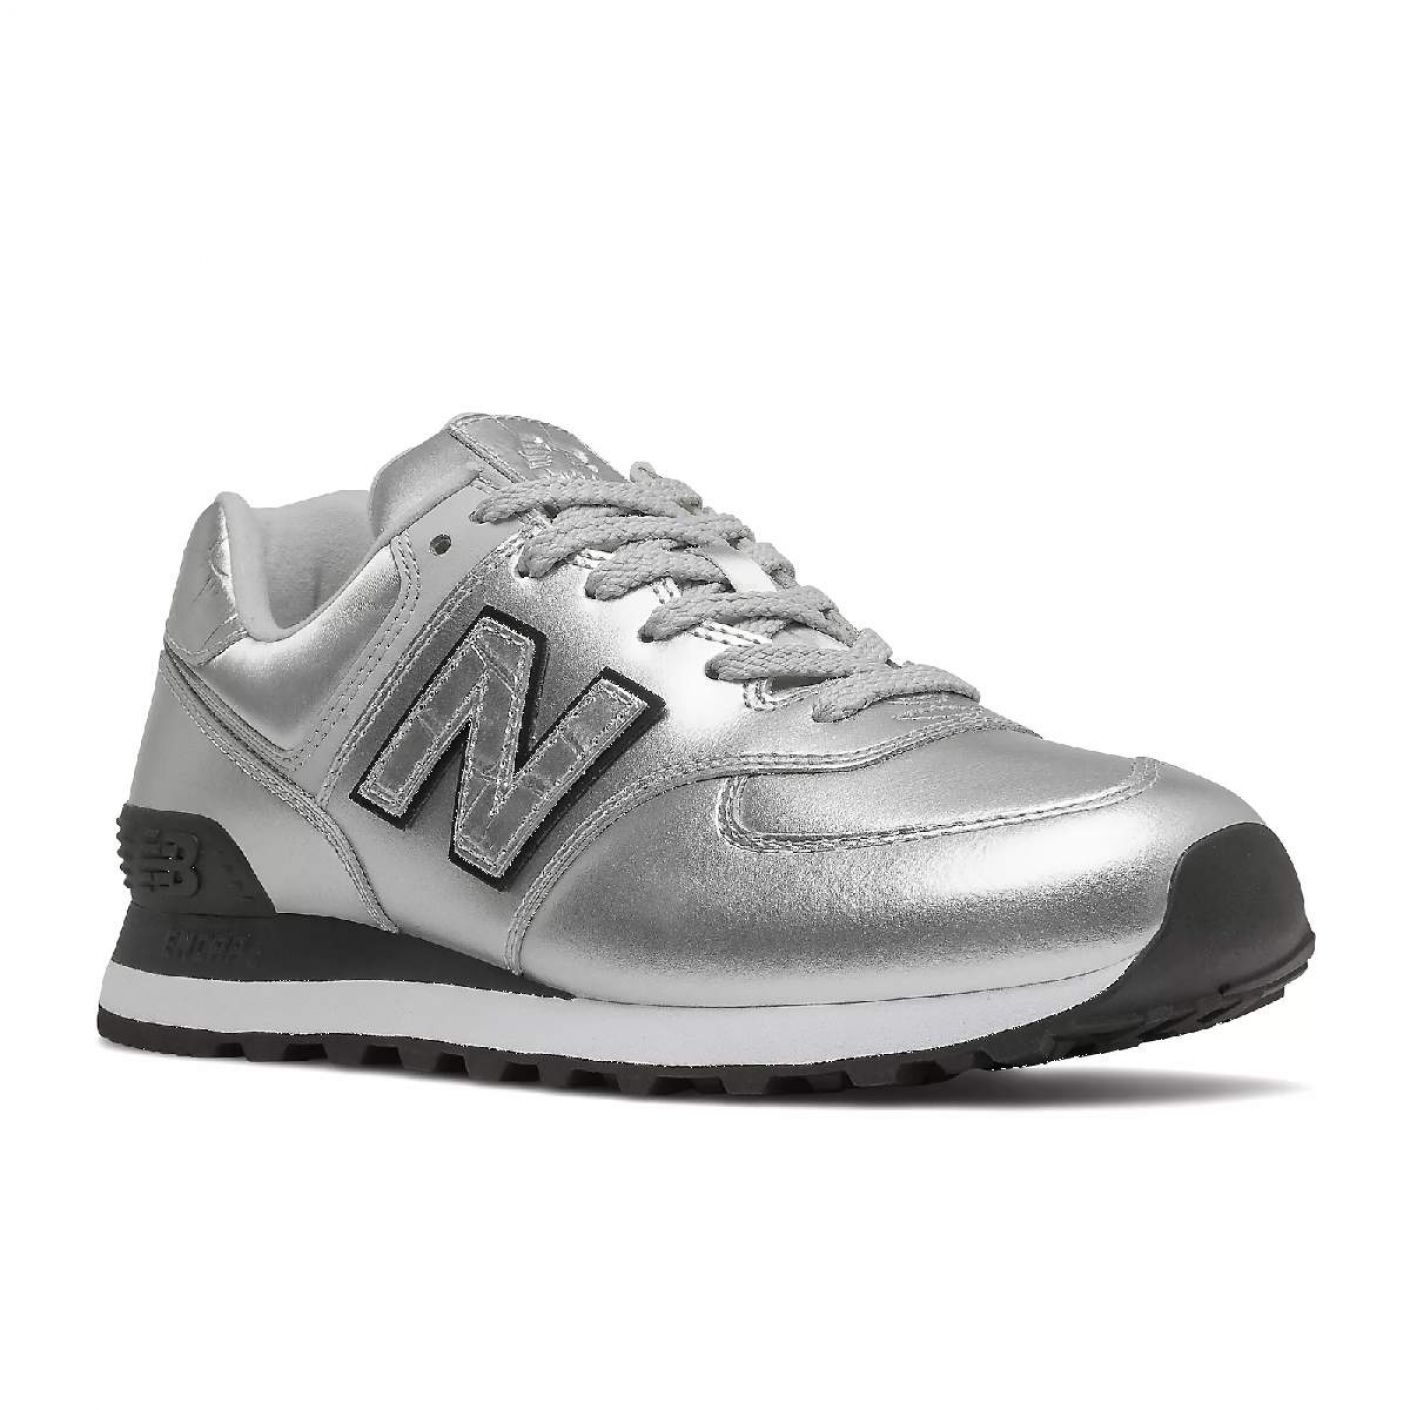 New Balance 574 in Pelle Silver